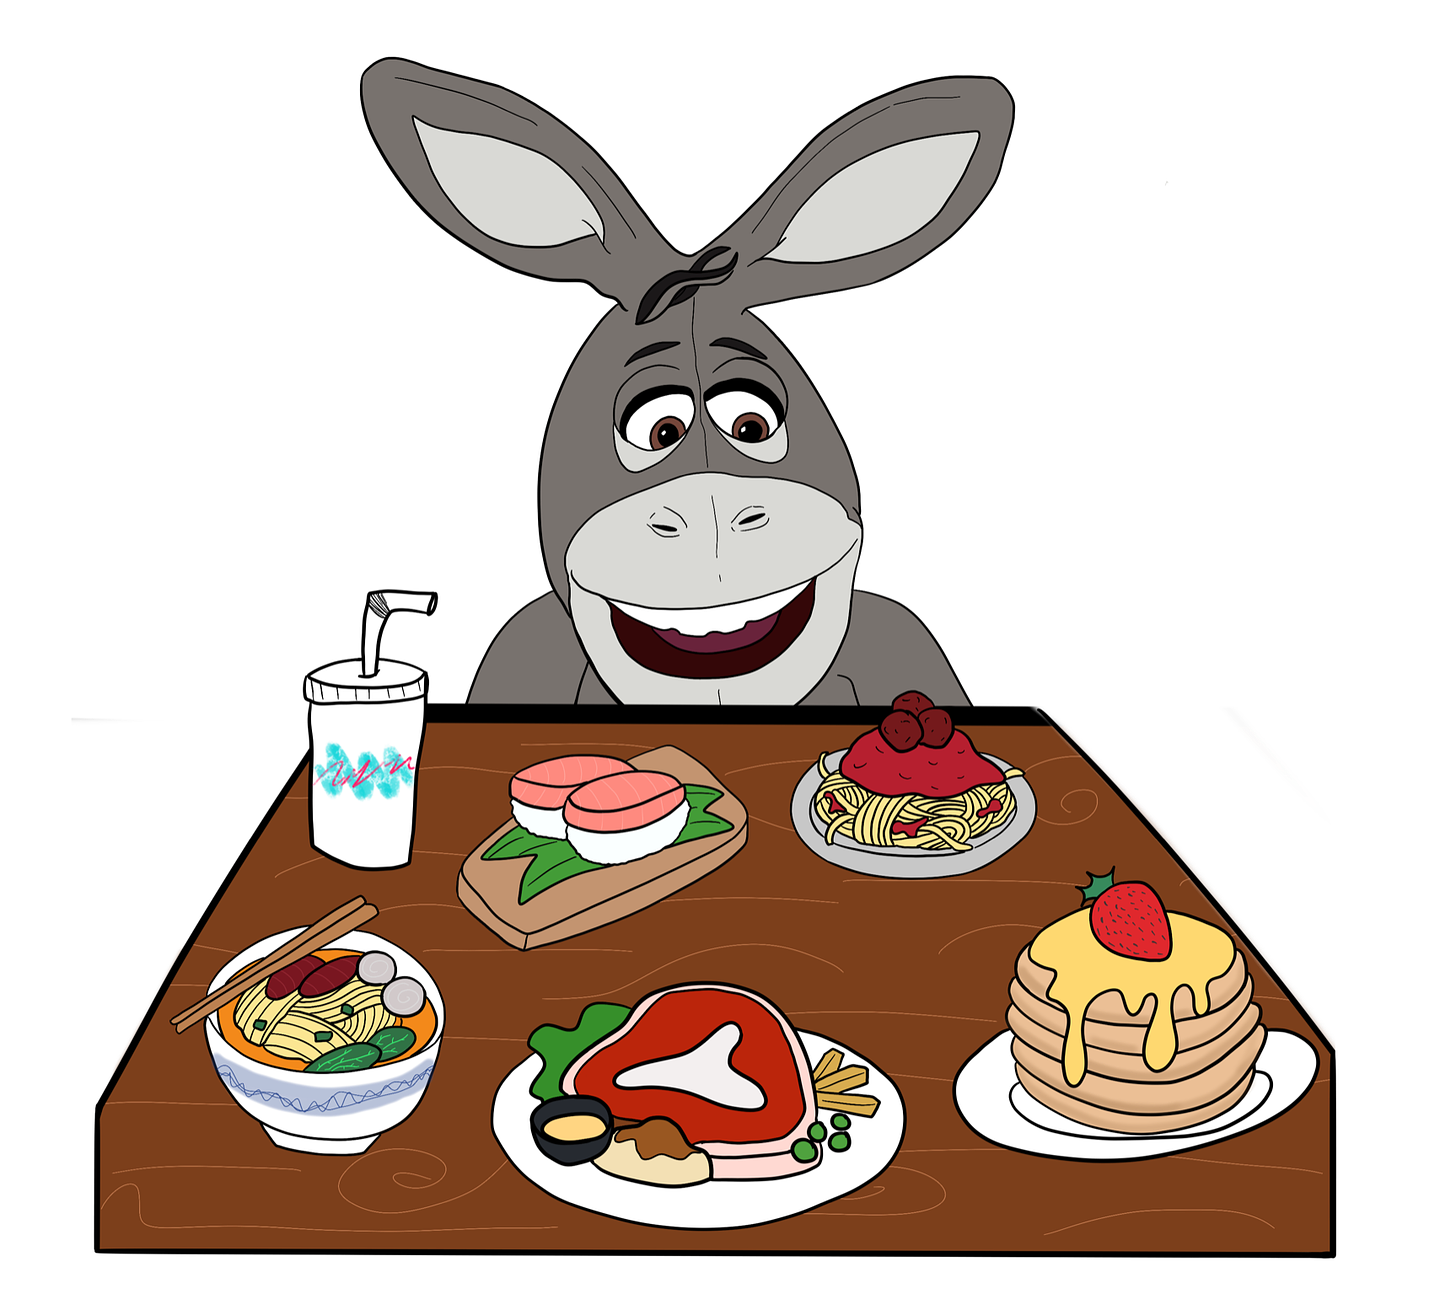 Hoté the Donkey sitting at a table loaded with food.